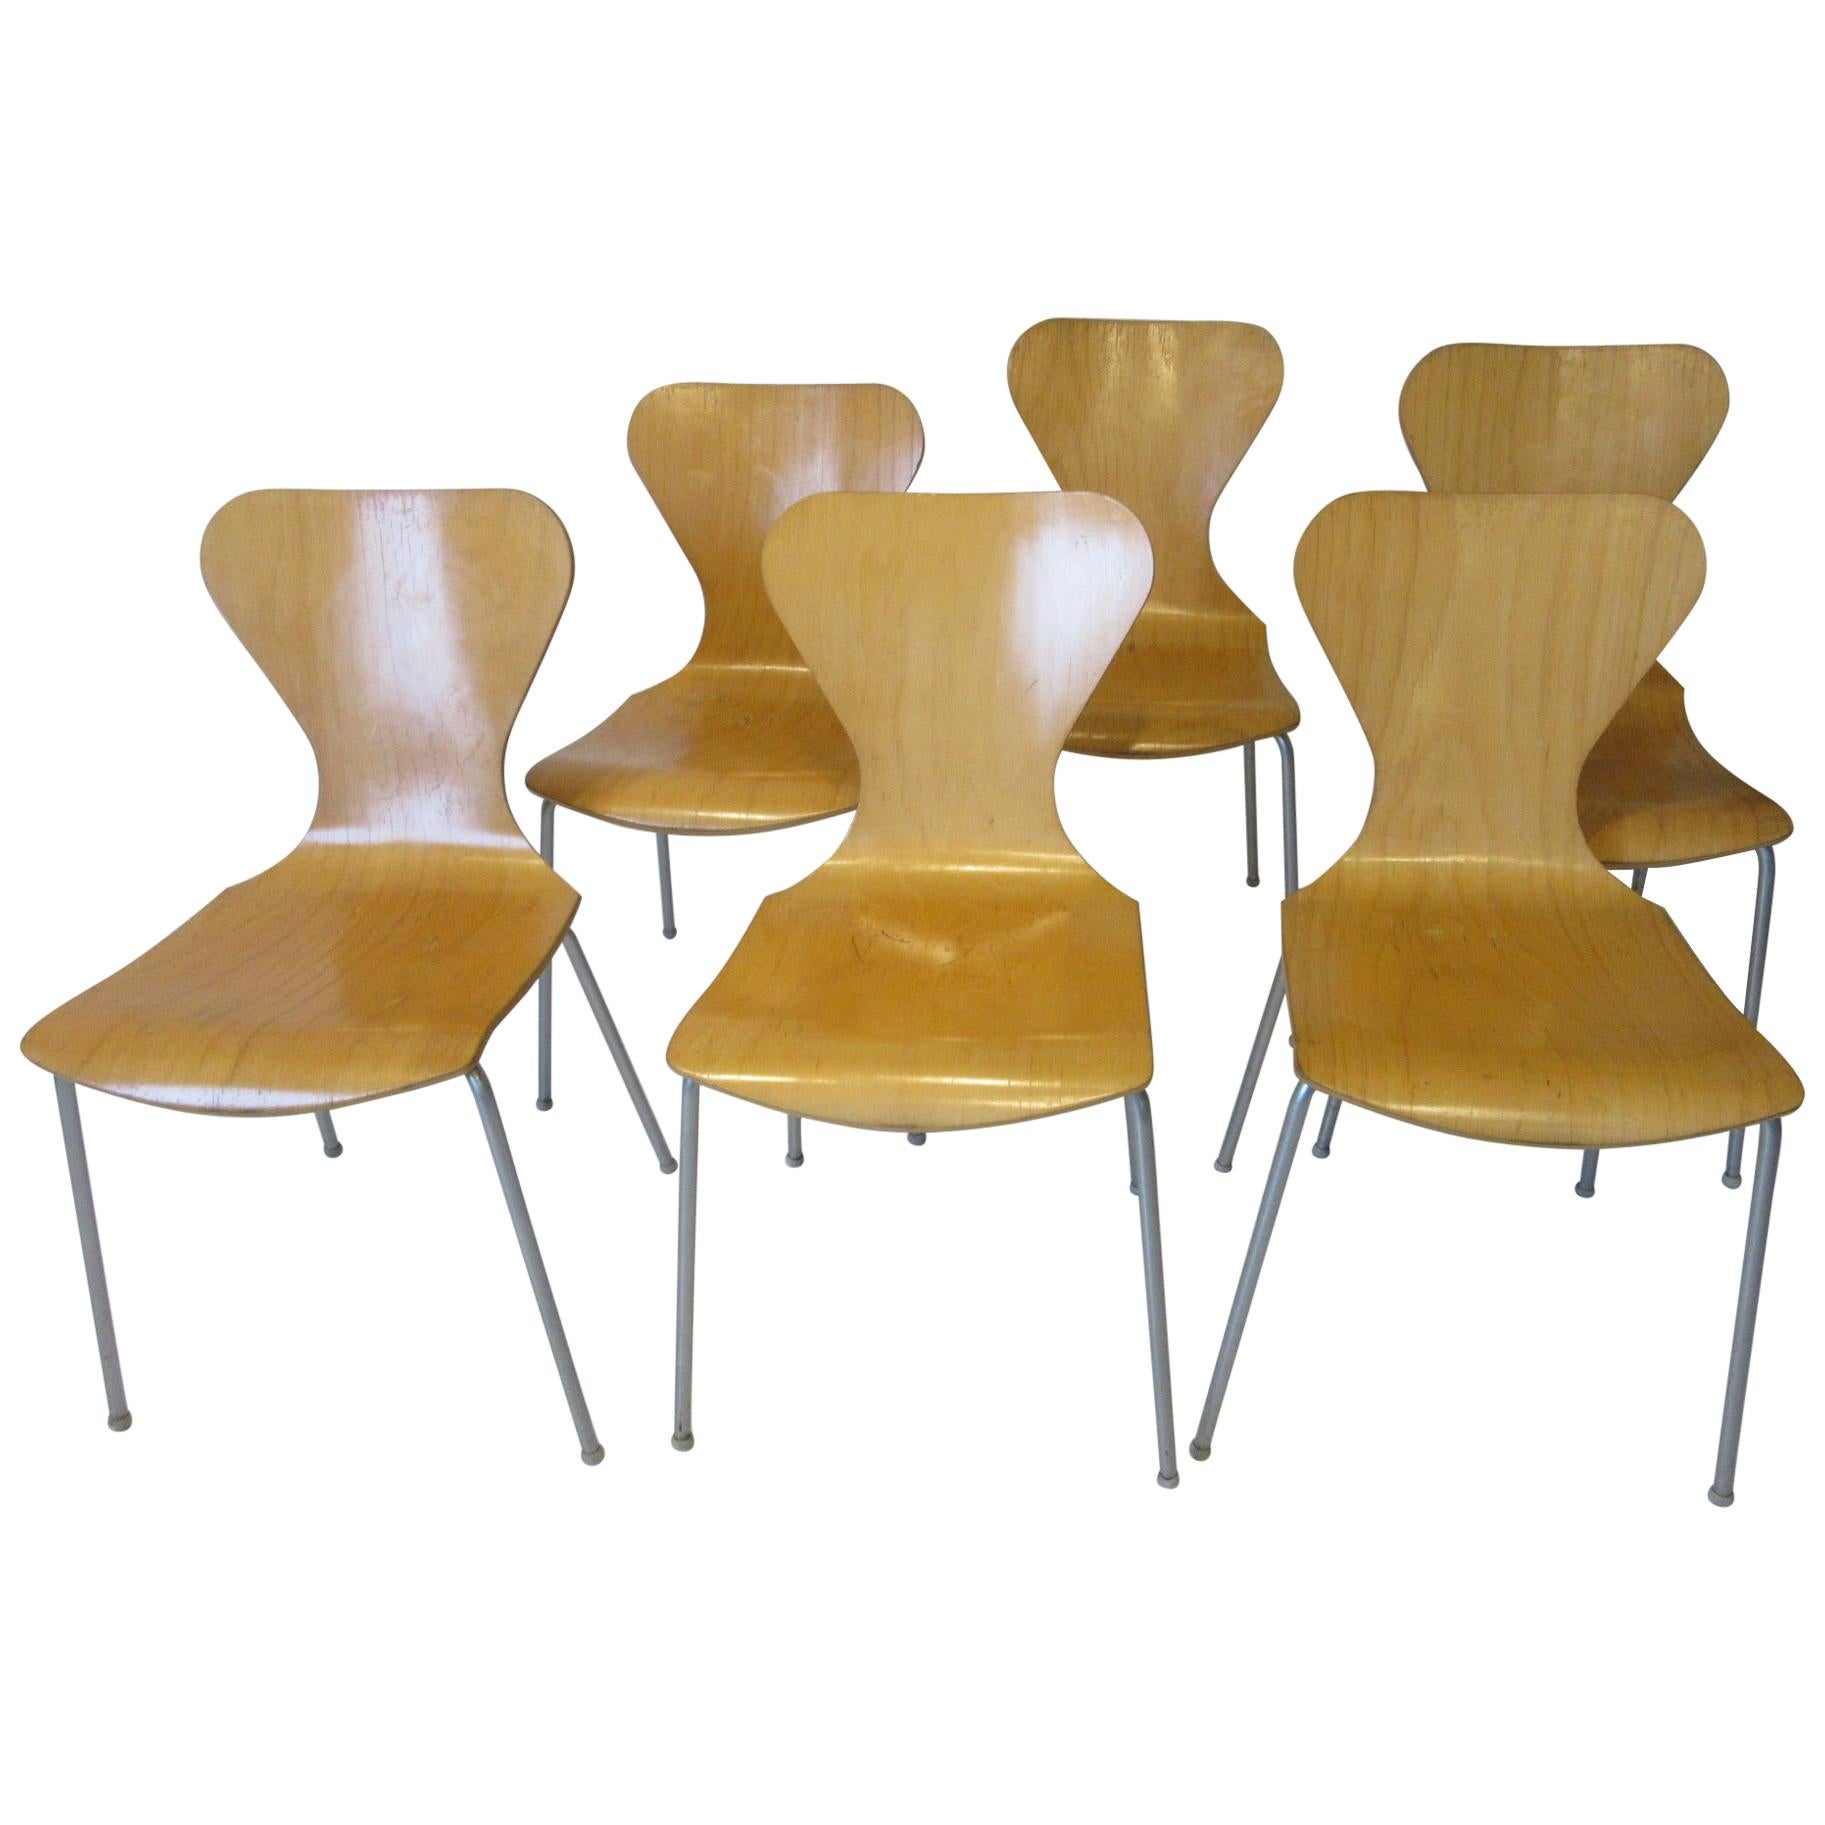 Industrial Molded Plywood Dining Chairs